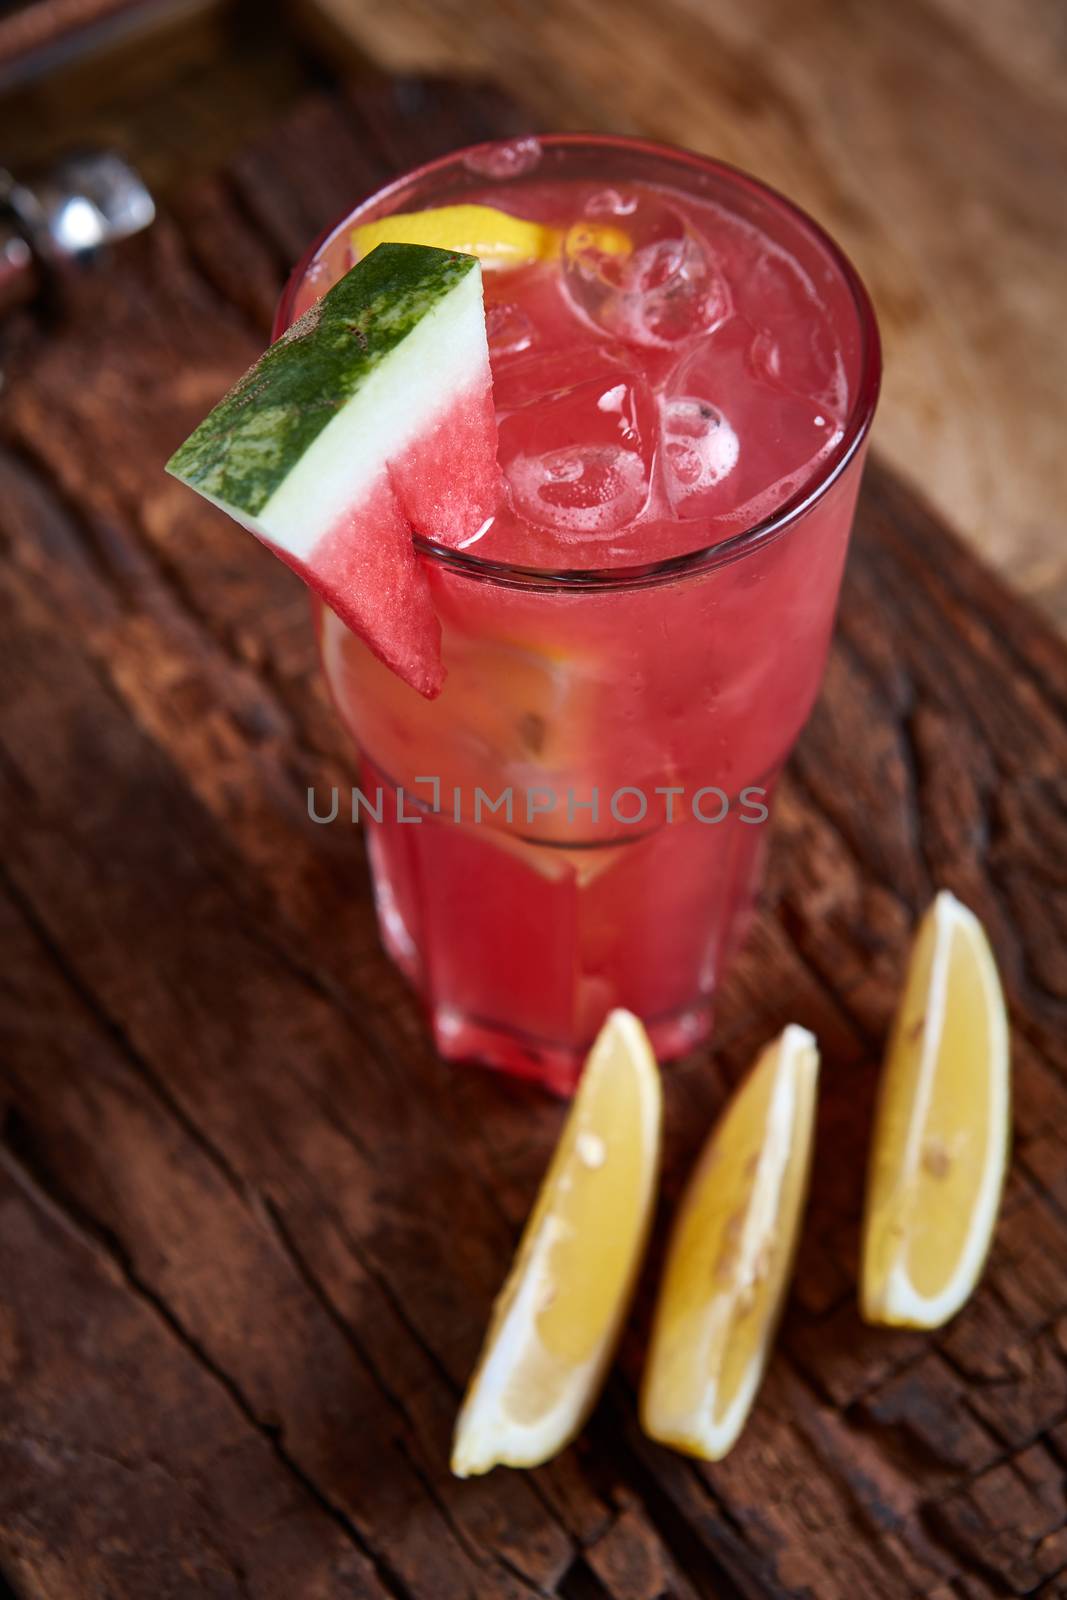 Homemade watermelon lemonade with mint and lemon in glasses and slices of watermelon